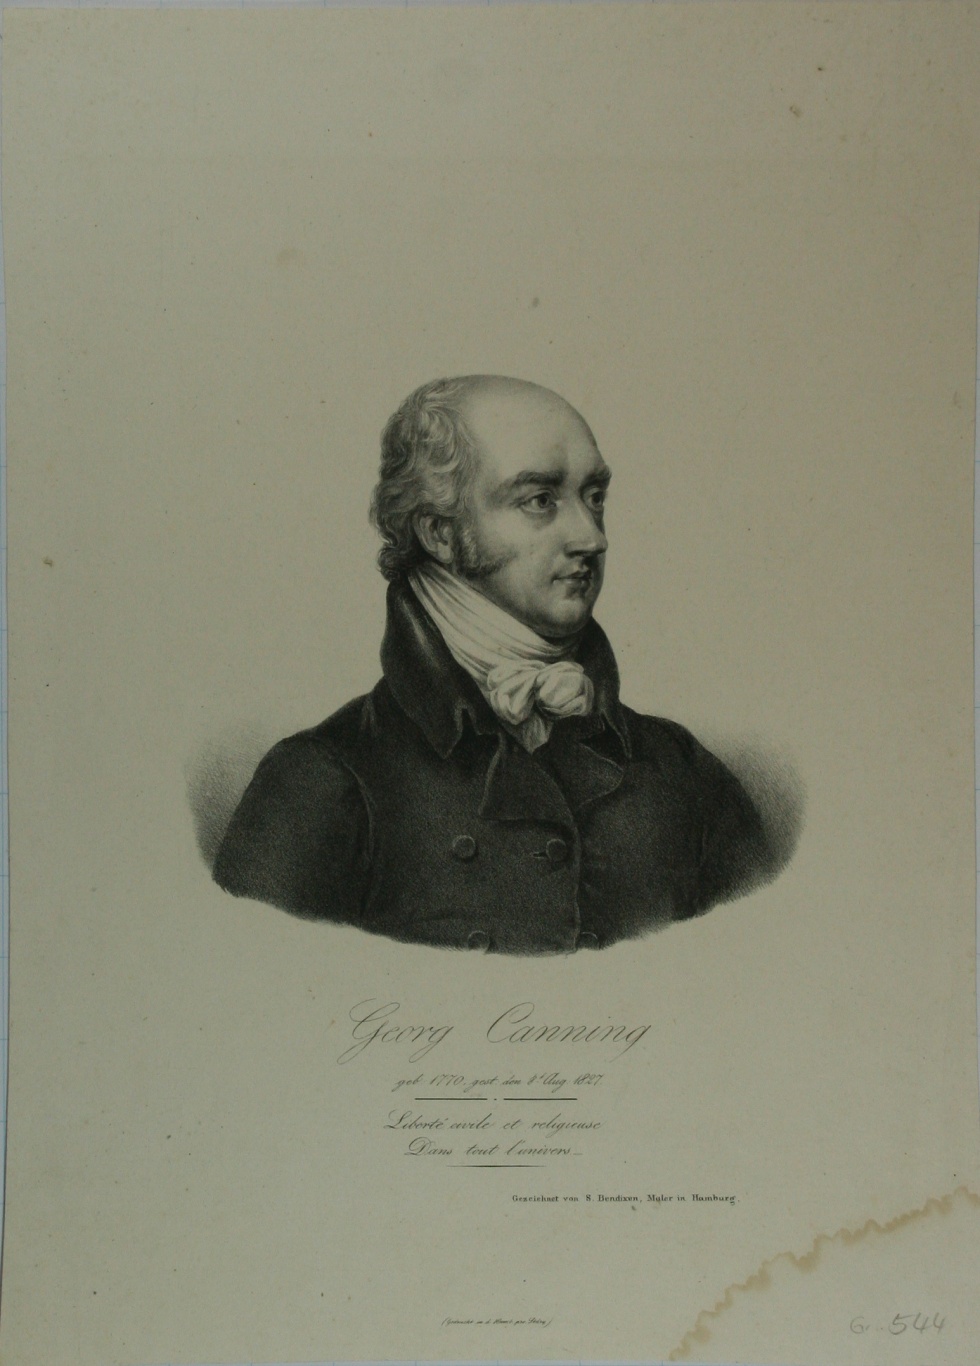 &quot;Georg Canning&quot; (Schlossmuseum Jever CC BY-NC-SA)